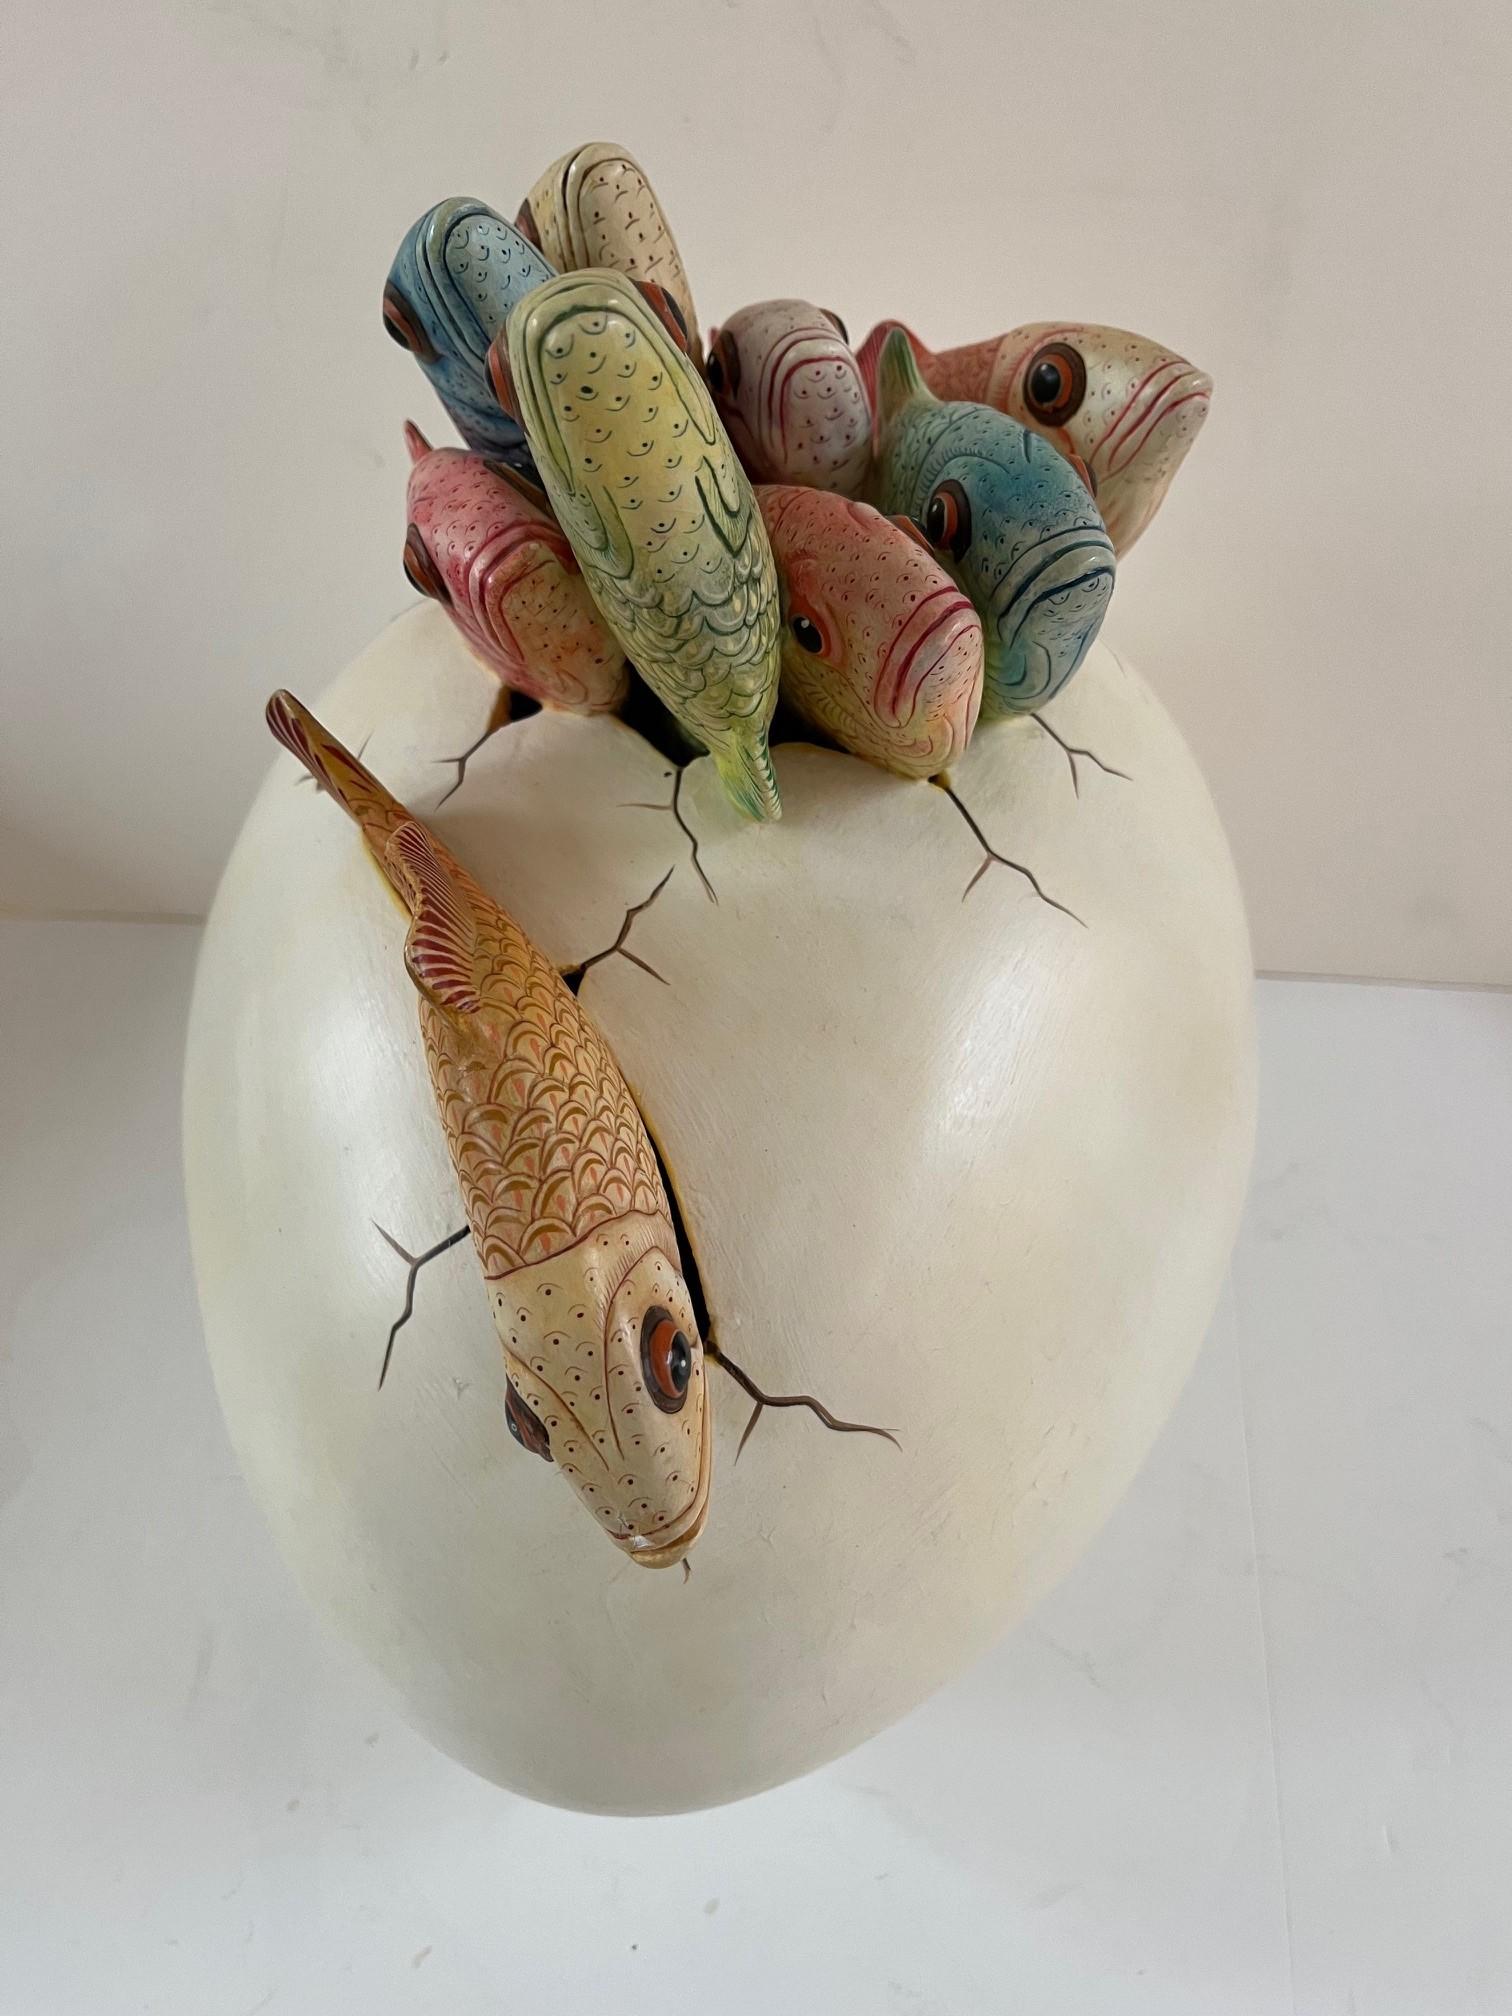 Mid-20th Century Vintage Large Ceramic Hatching Fish Egg Sculpture Figuring by Sergio Bustamente. For Sale